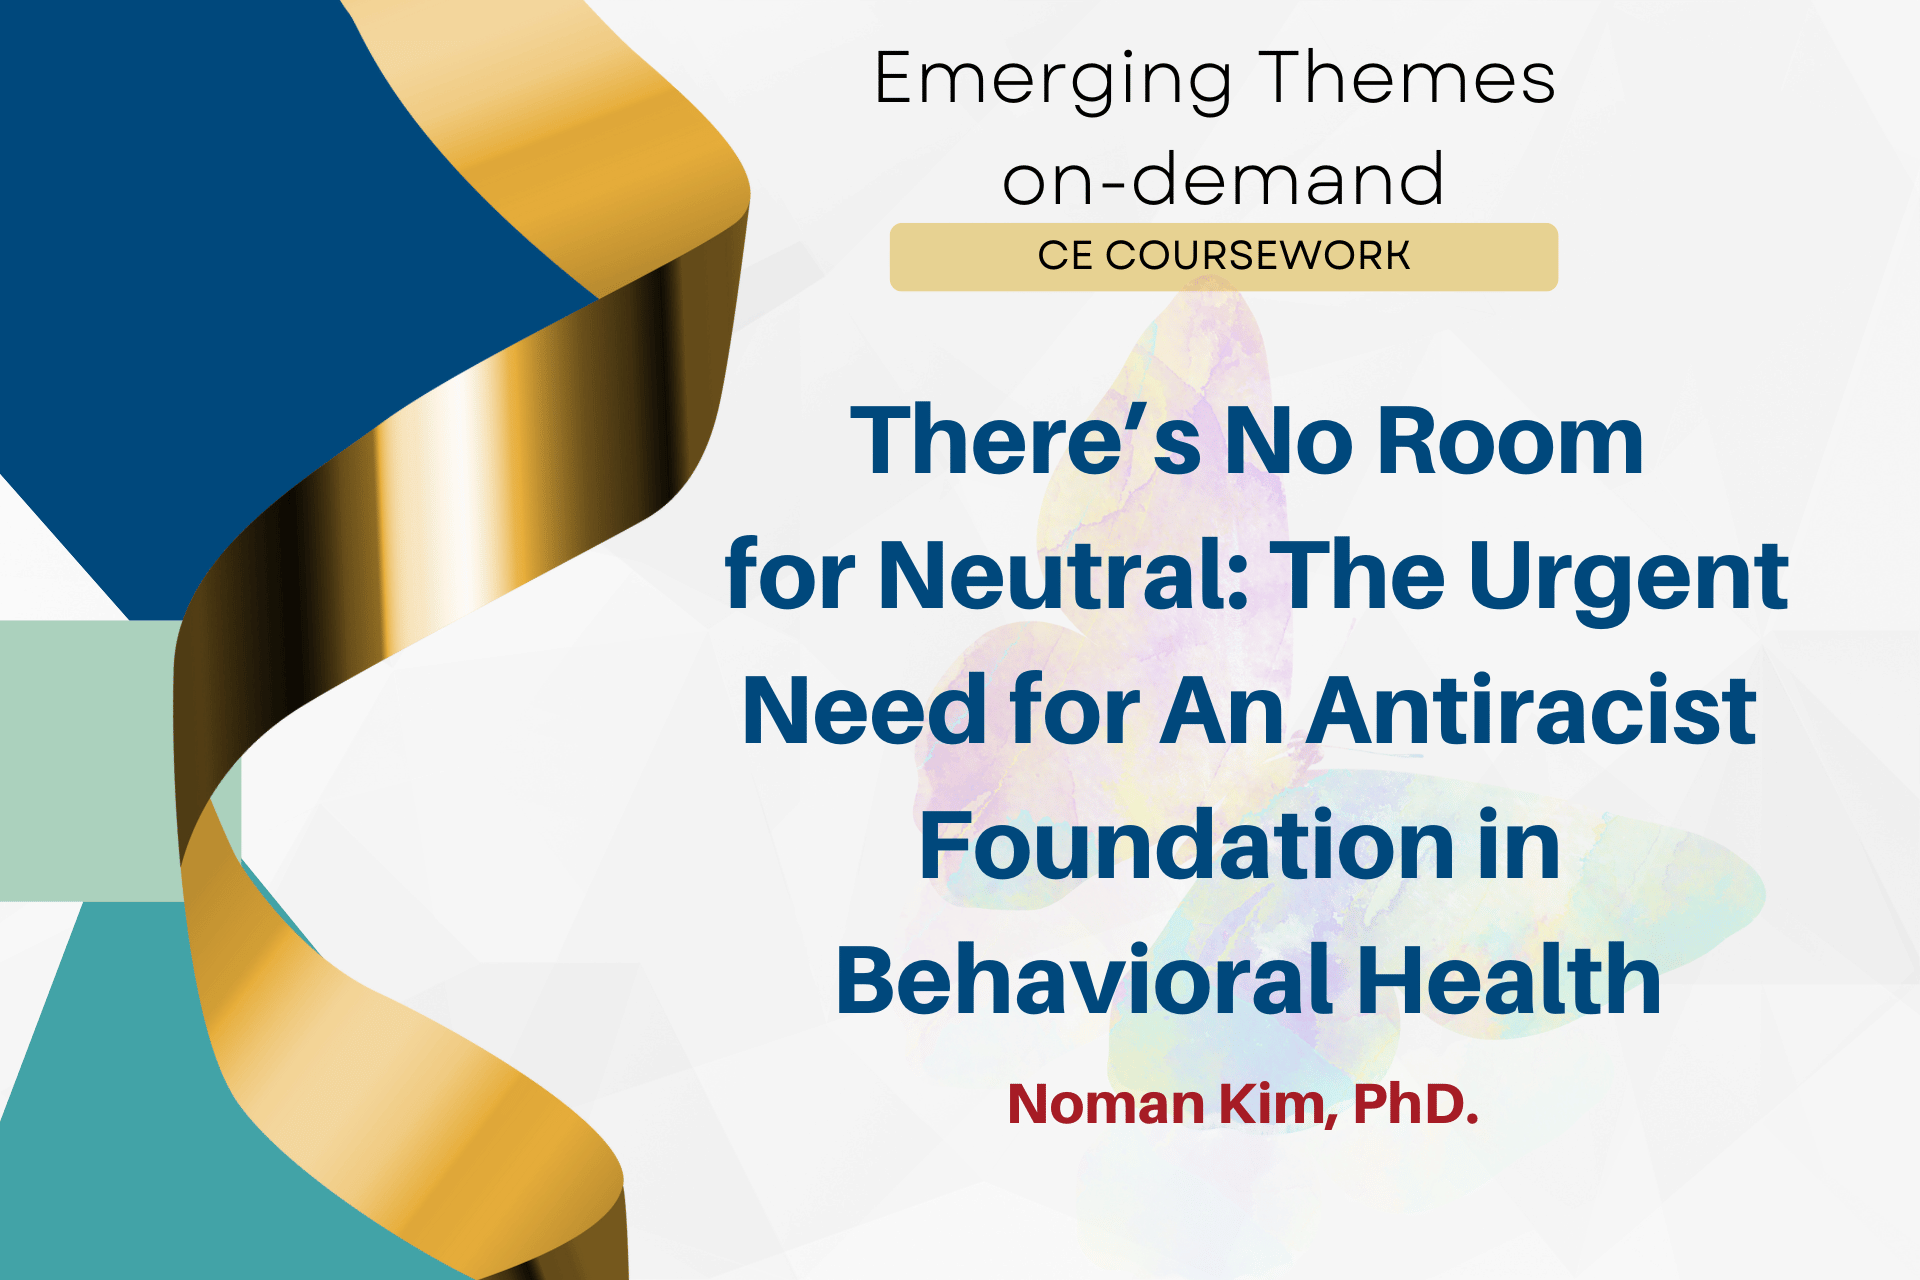 There’s No Room for Neutral: The Urgent Need for An Antiracist Foundation in Behavioral Health